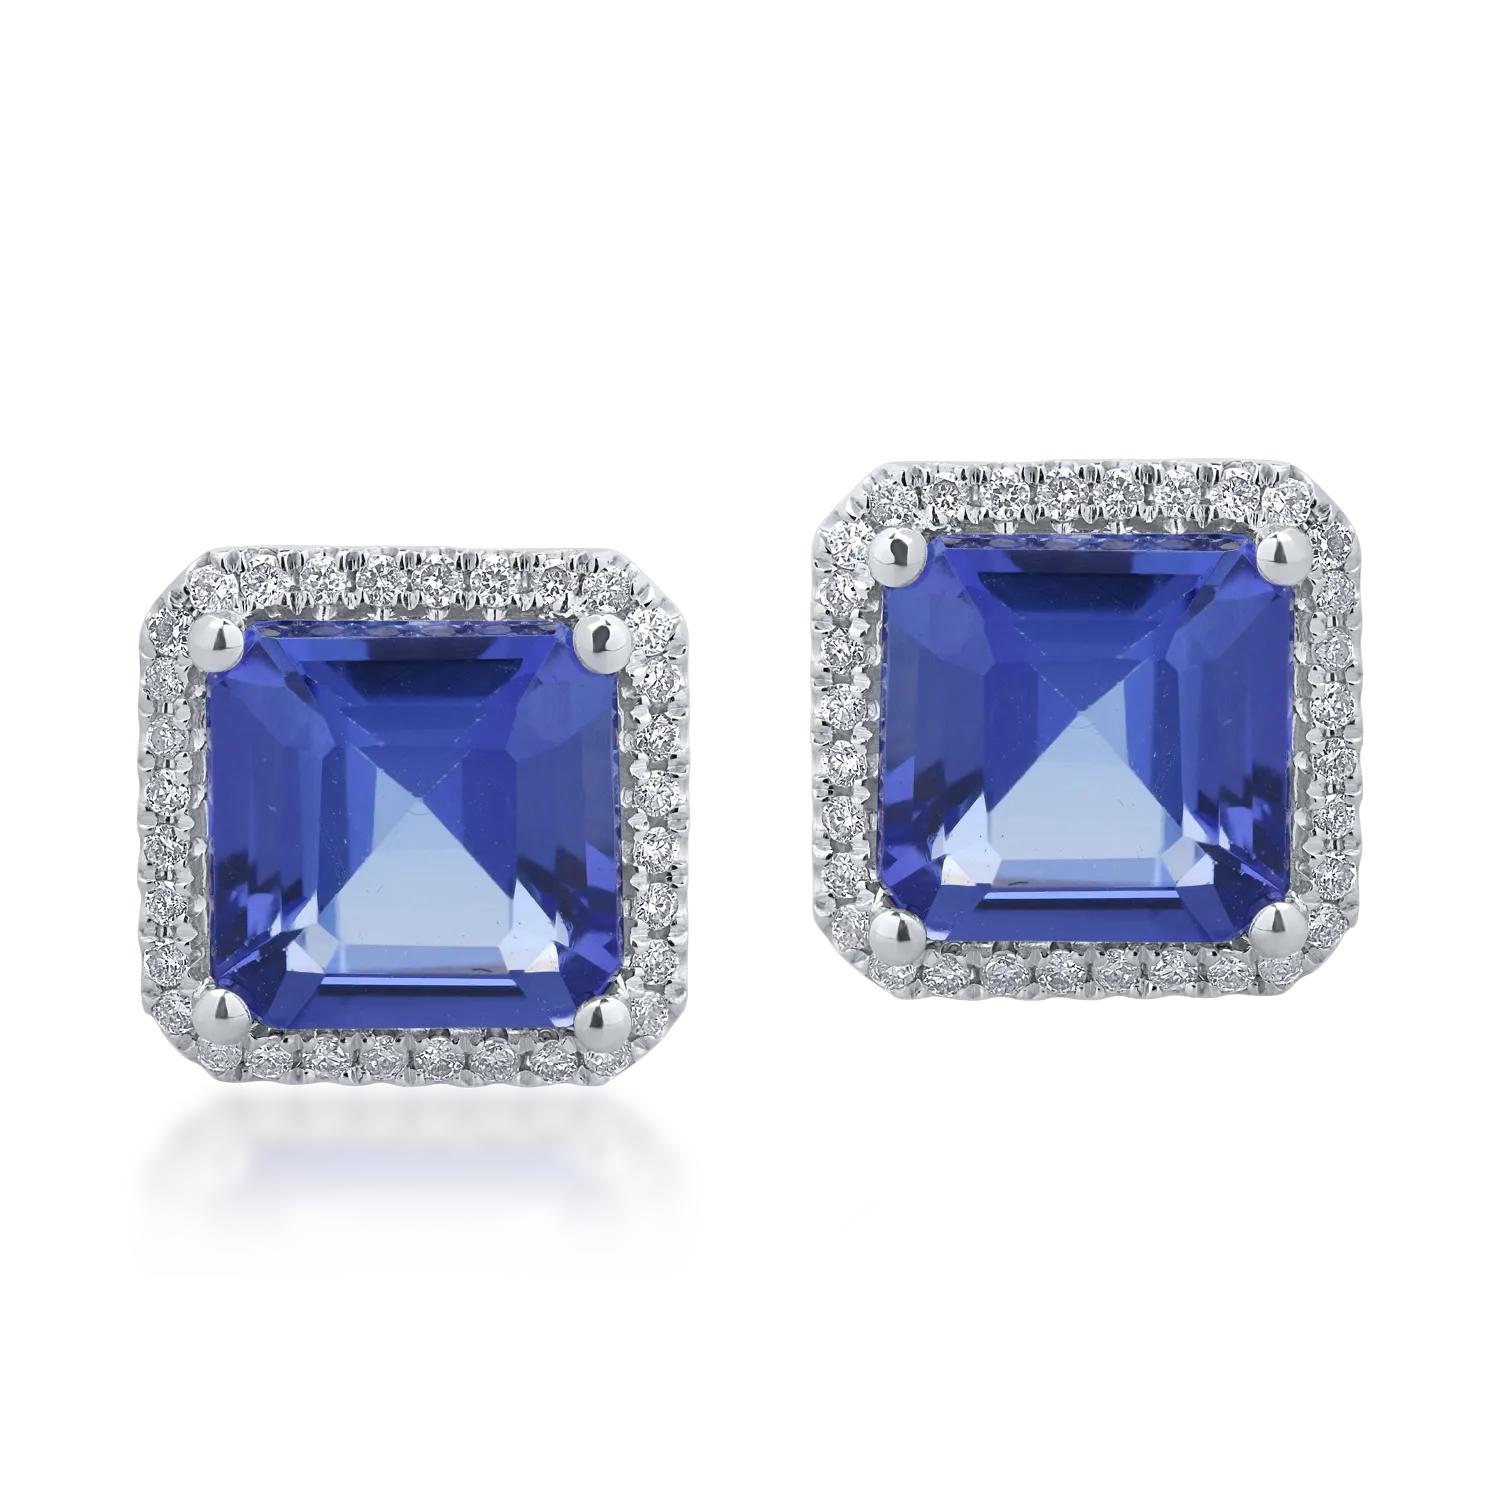 18K white gold earrings with 4.97ct tanzanites and 0.23ct diamonds